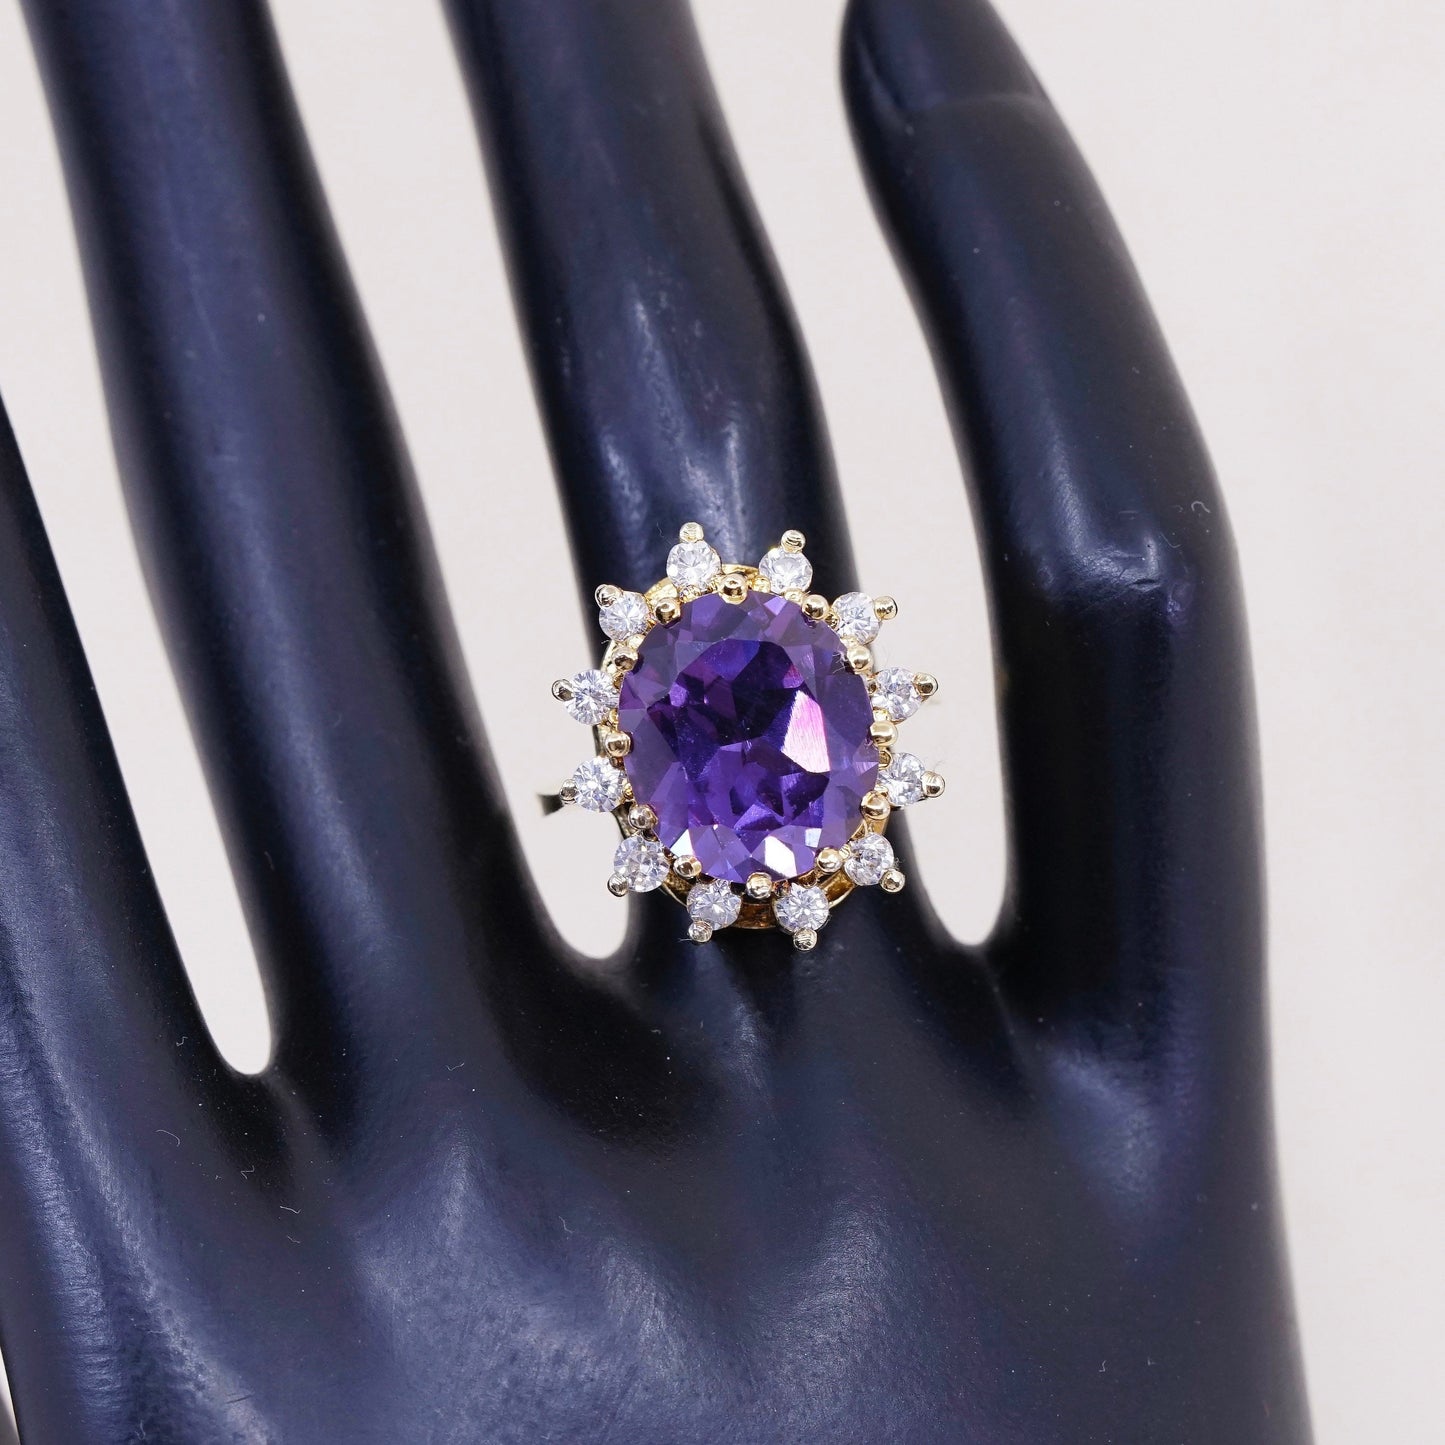 sz 7, Vermeil gold over sterling silver 925 cocktail ring with amethyst and Cz